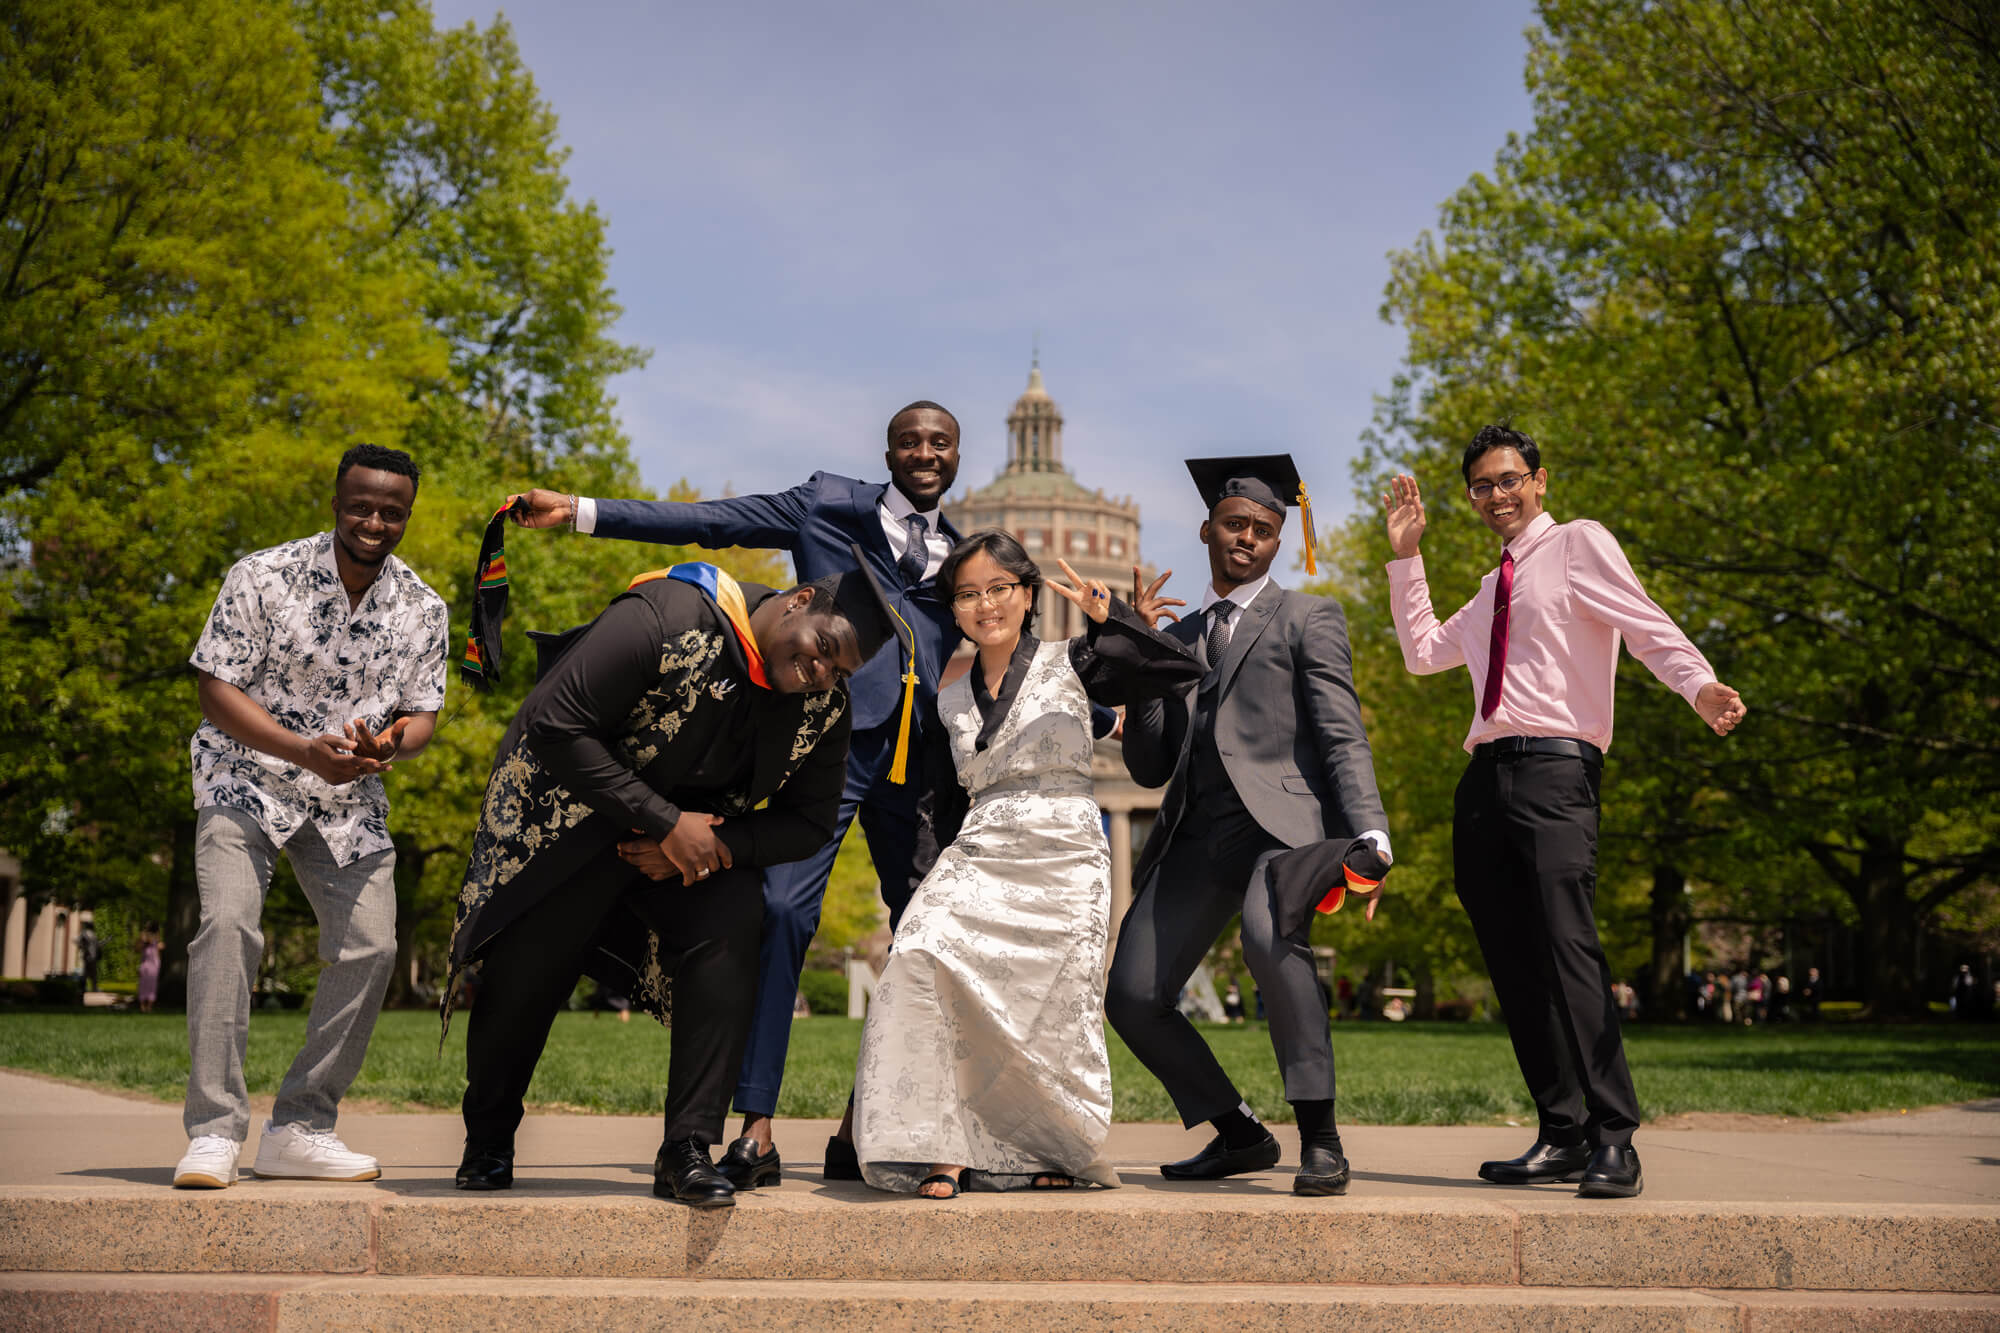 A group of six diverse graduates, dressed in caps, gowns, and formal wear, joyfully pose for a celebratory photo on a sunny day in front of a historic building surrounded by lush green trees. They are smiling and striking playful poses, exuding excitement and pride.